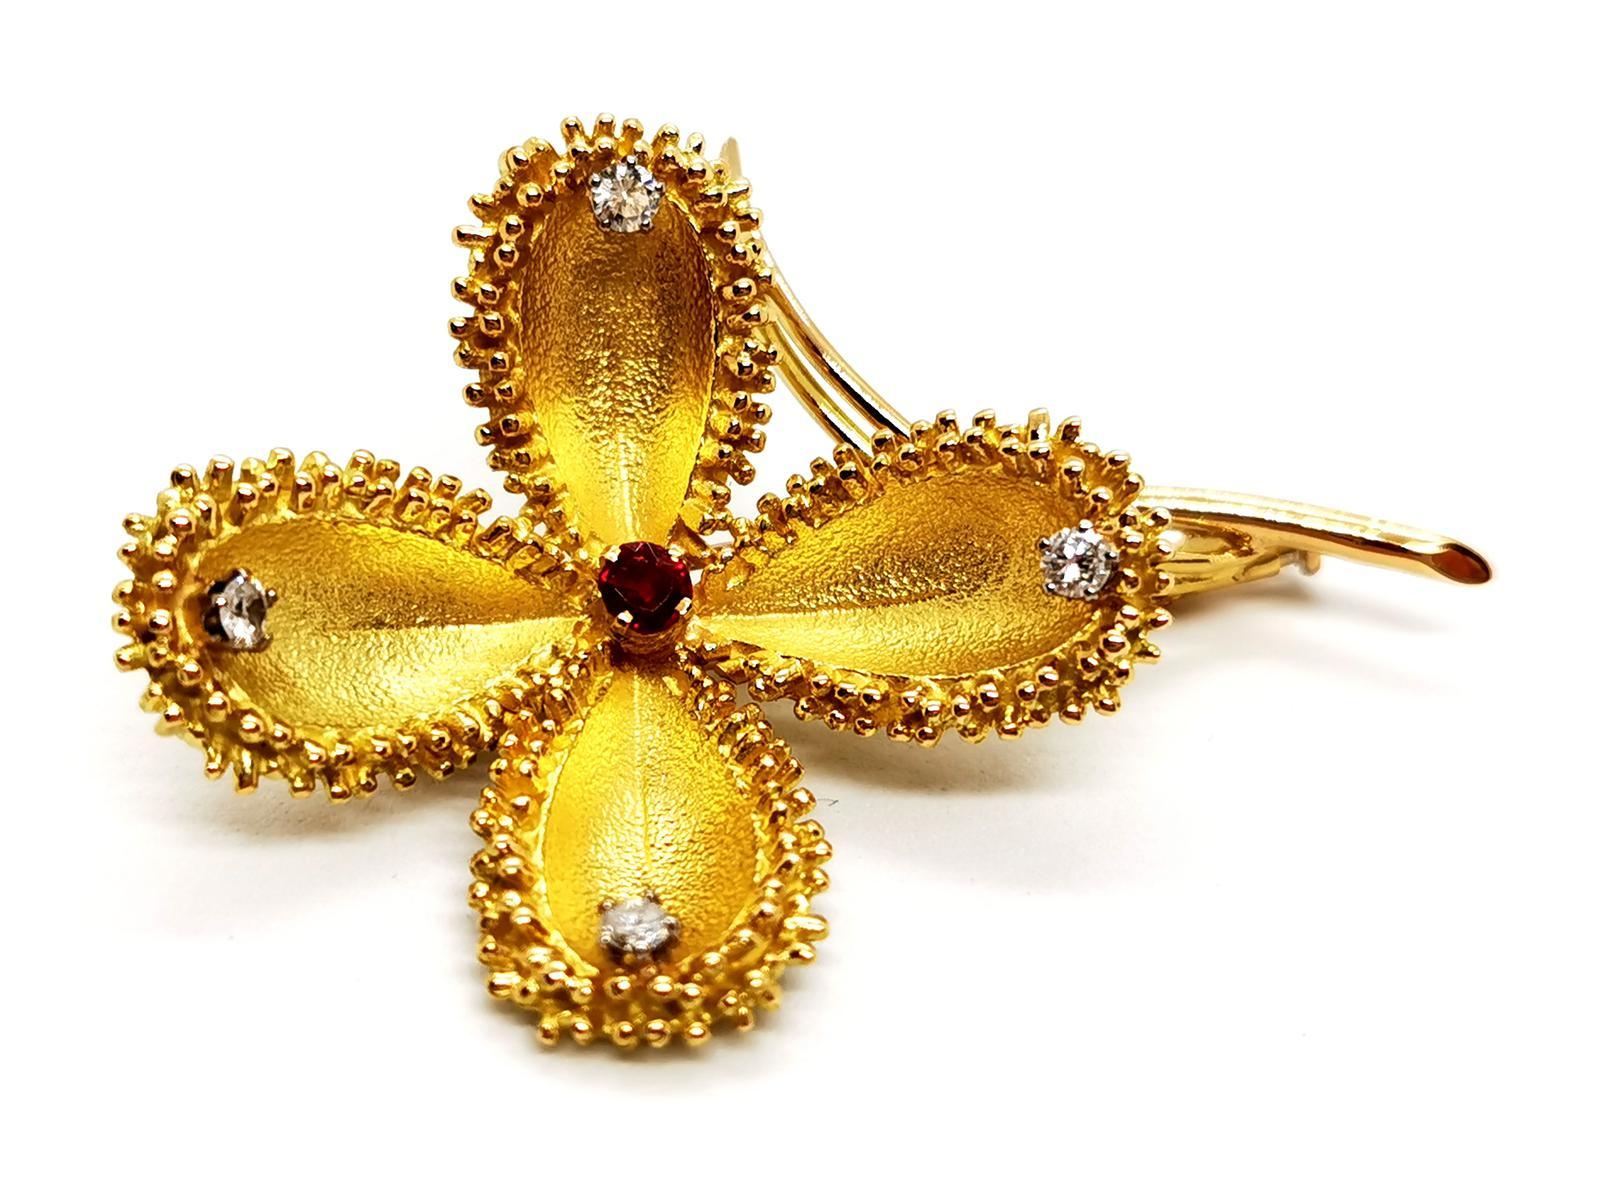 Flower brooch. golden yellow 750 mils (18 carats). stem pink gold. yellow gold matt and shiny. a ruby ​​round about 0.17 ct. 4 brilliant-cut diamonds of about 0.07 ct each. total weight diamonds: about 0.28 ct. flower dimensions: 3.8 cm x 4 cm.